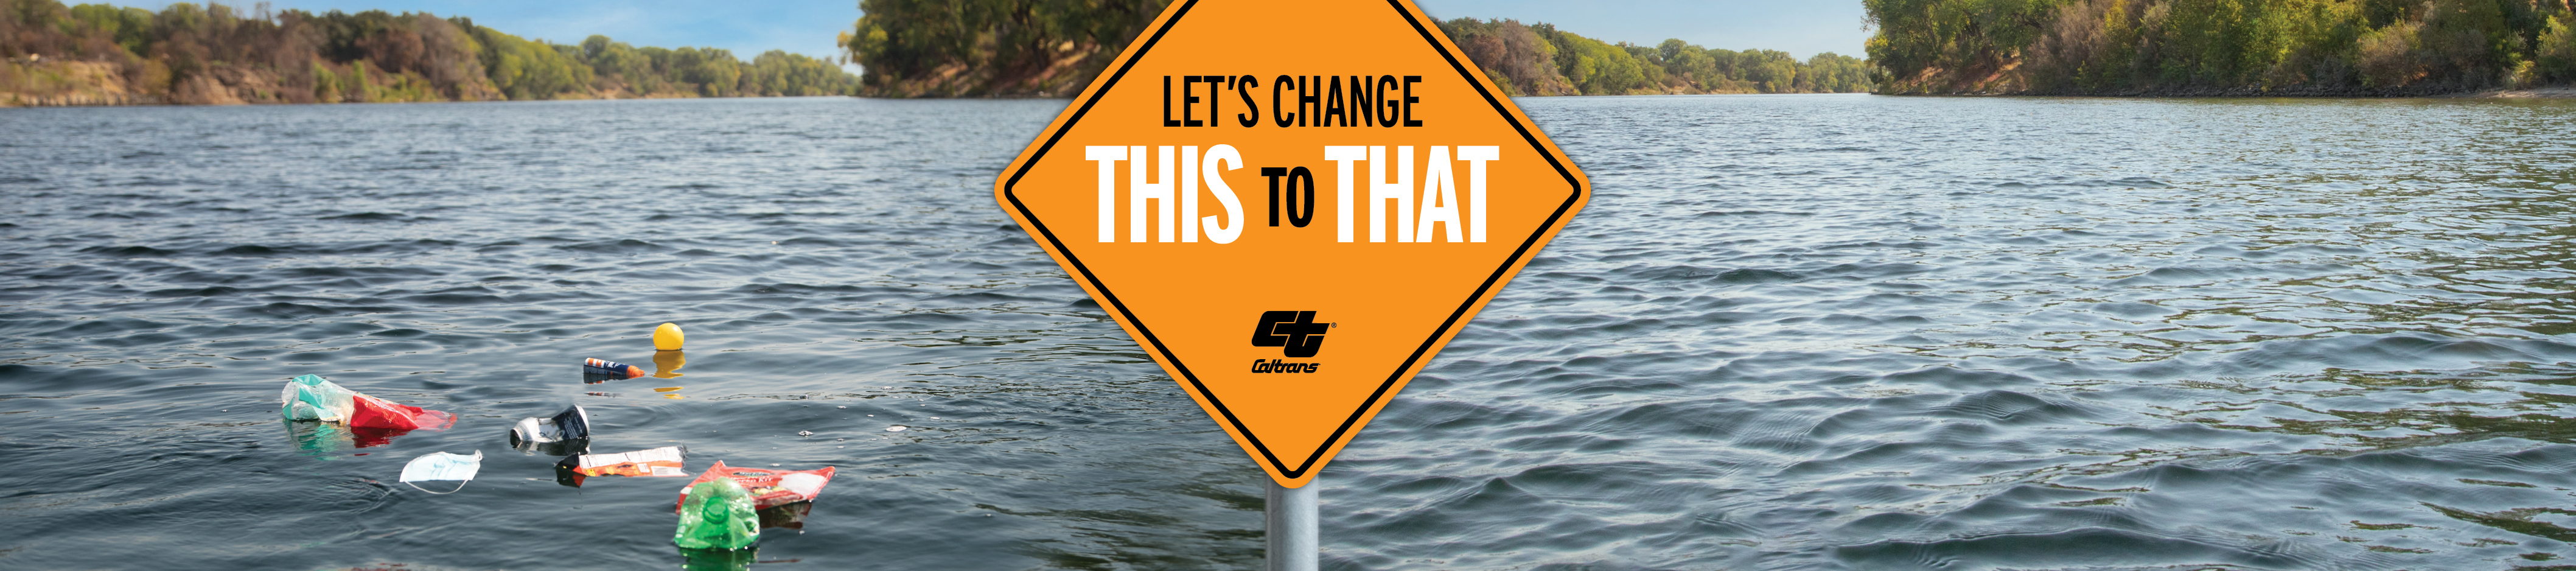 Let's Change This To That - stormwater pollution reduction campaign